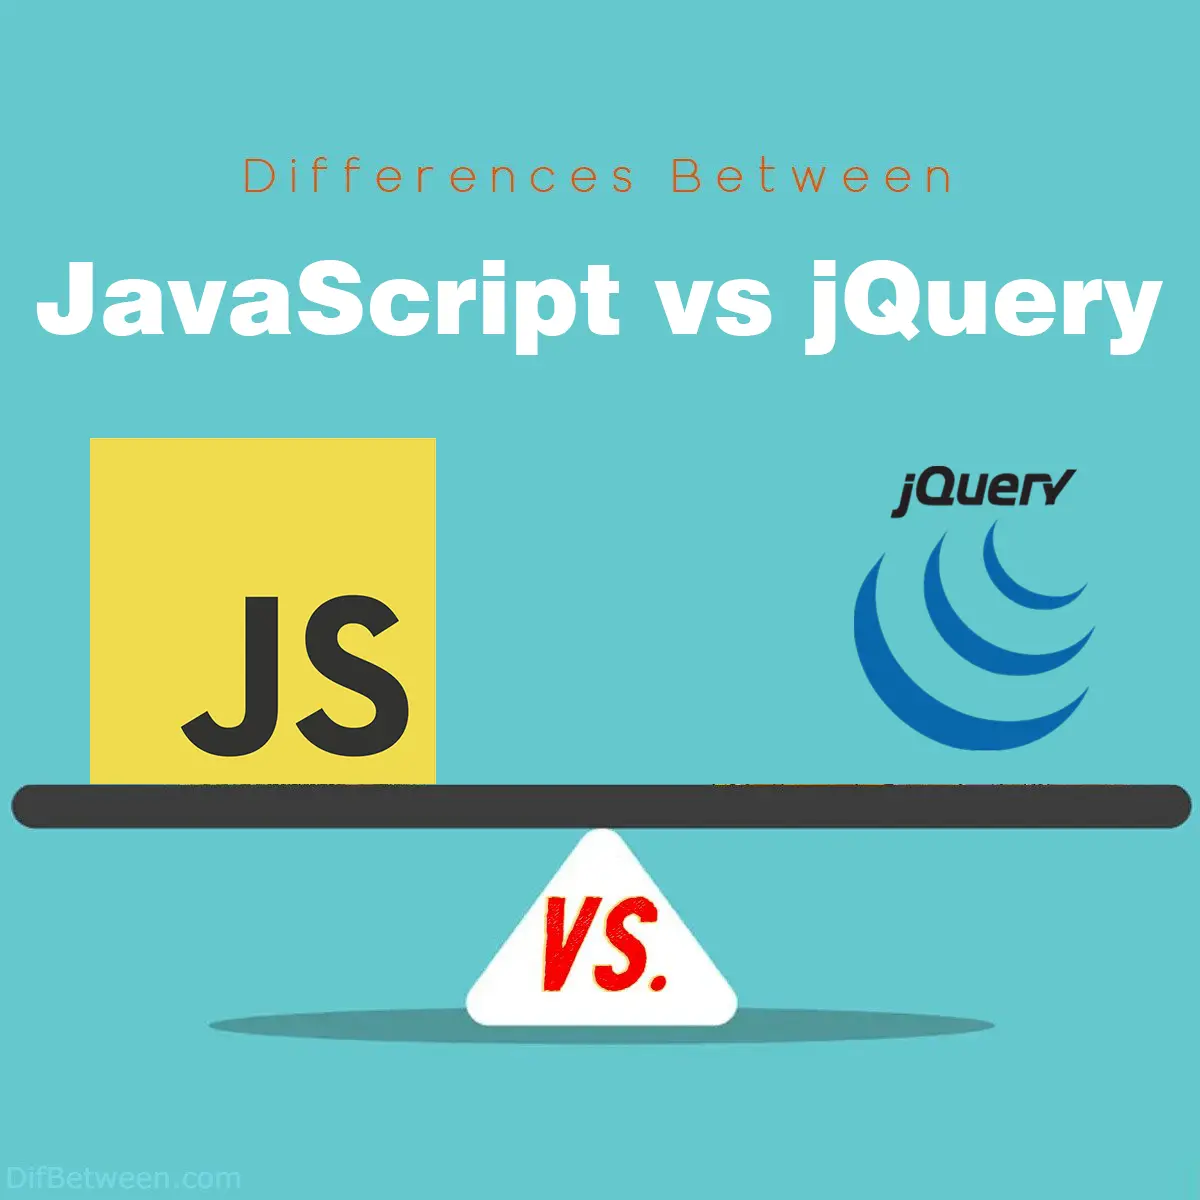 Differences Between JavaScript vs jQuery